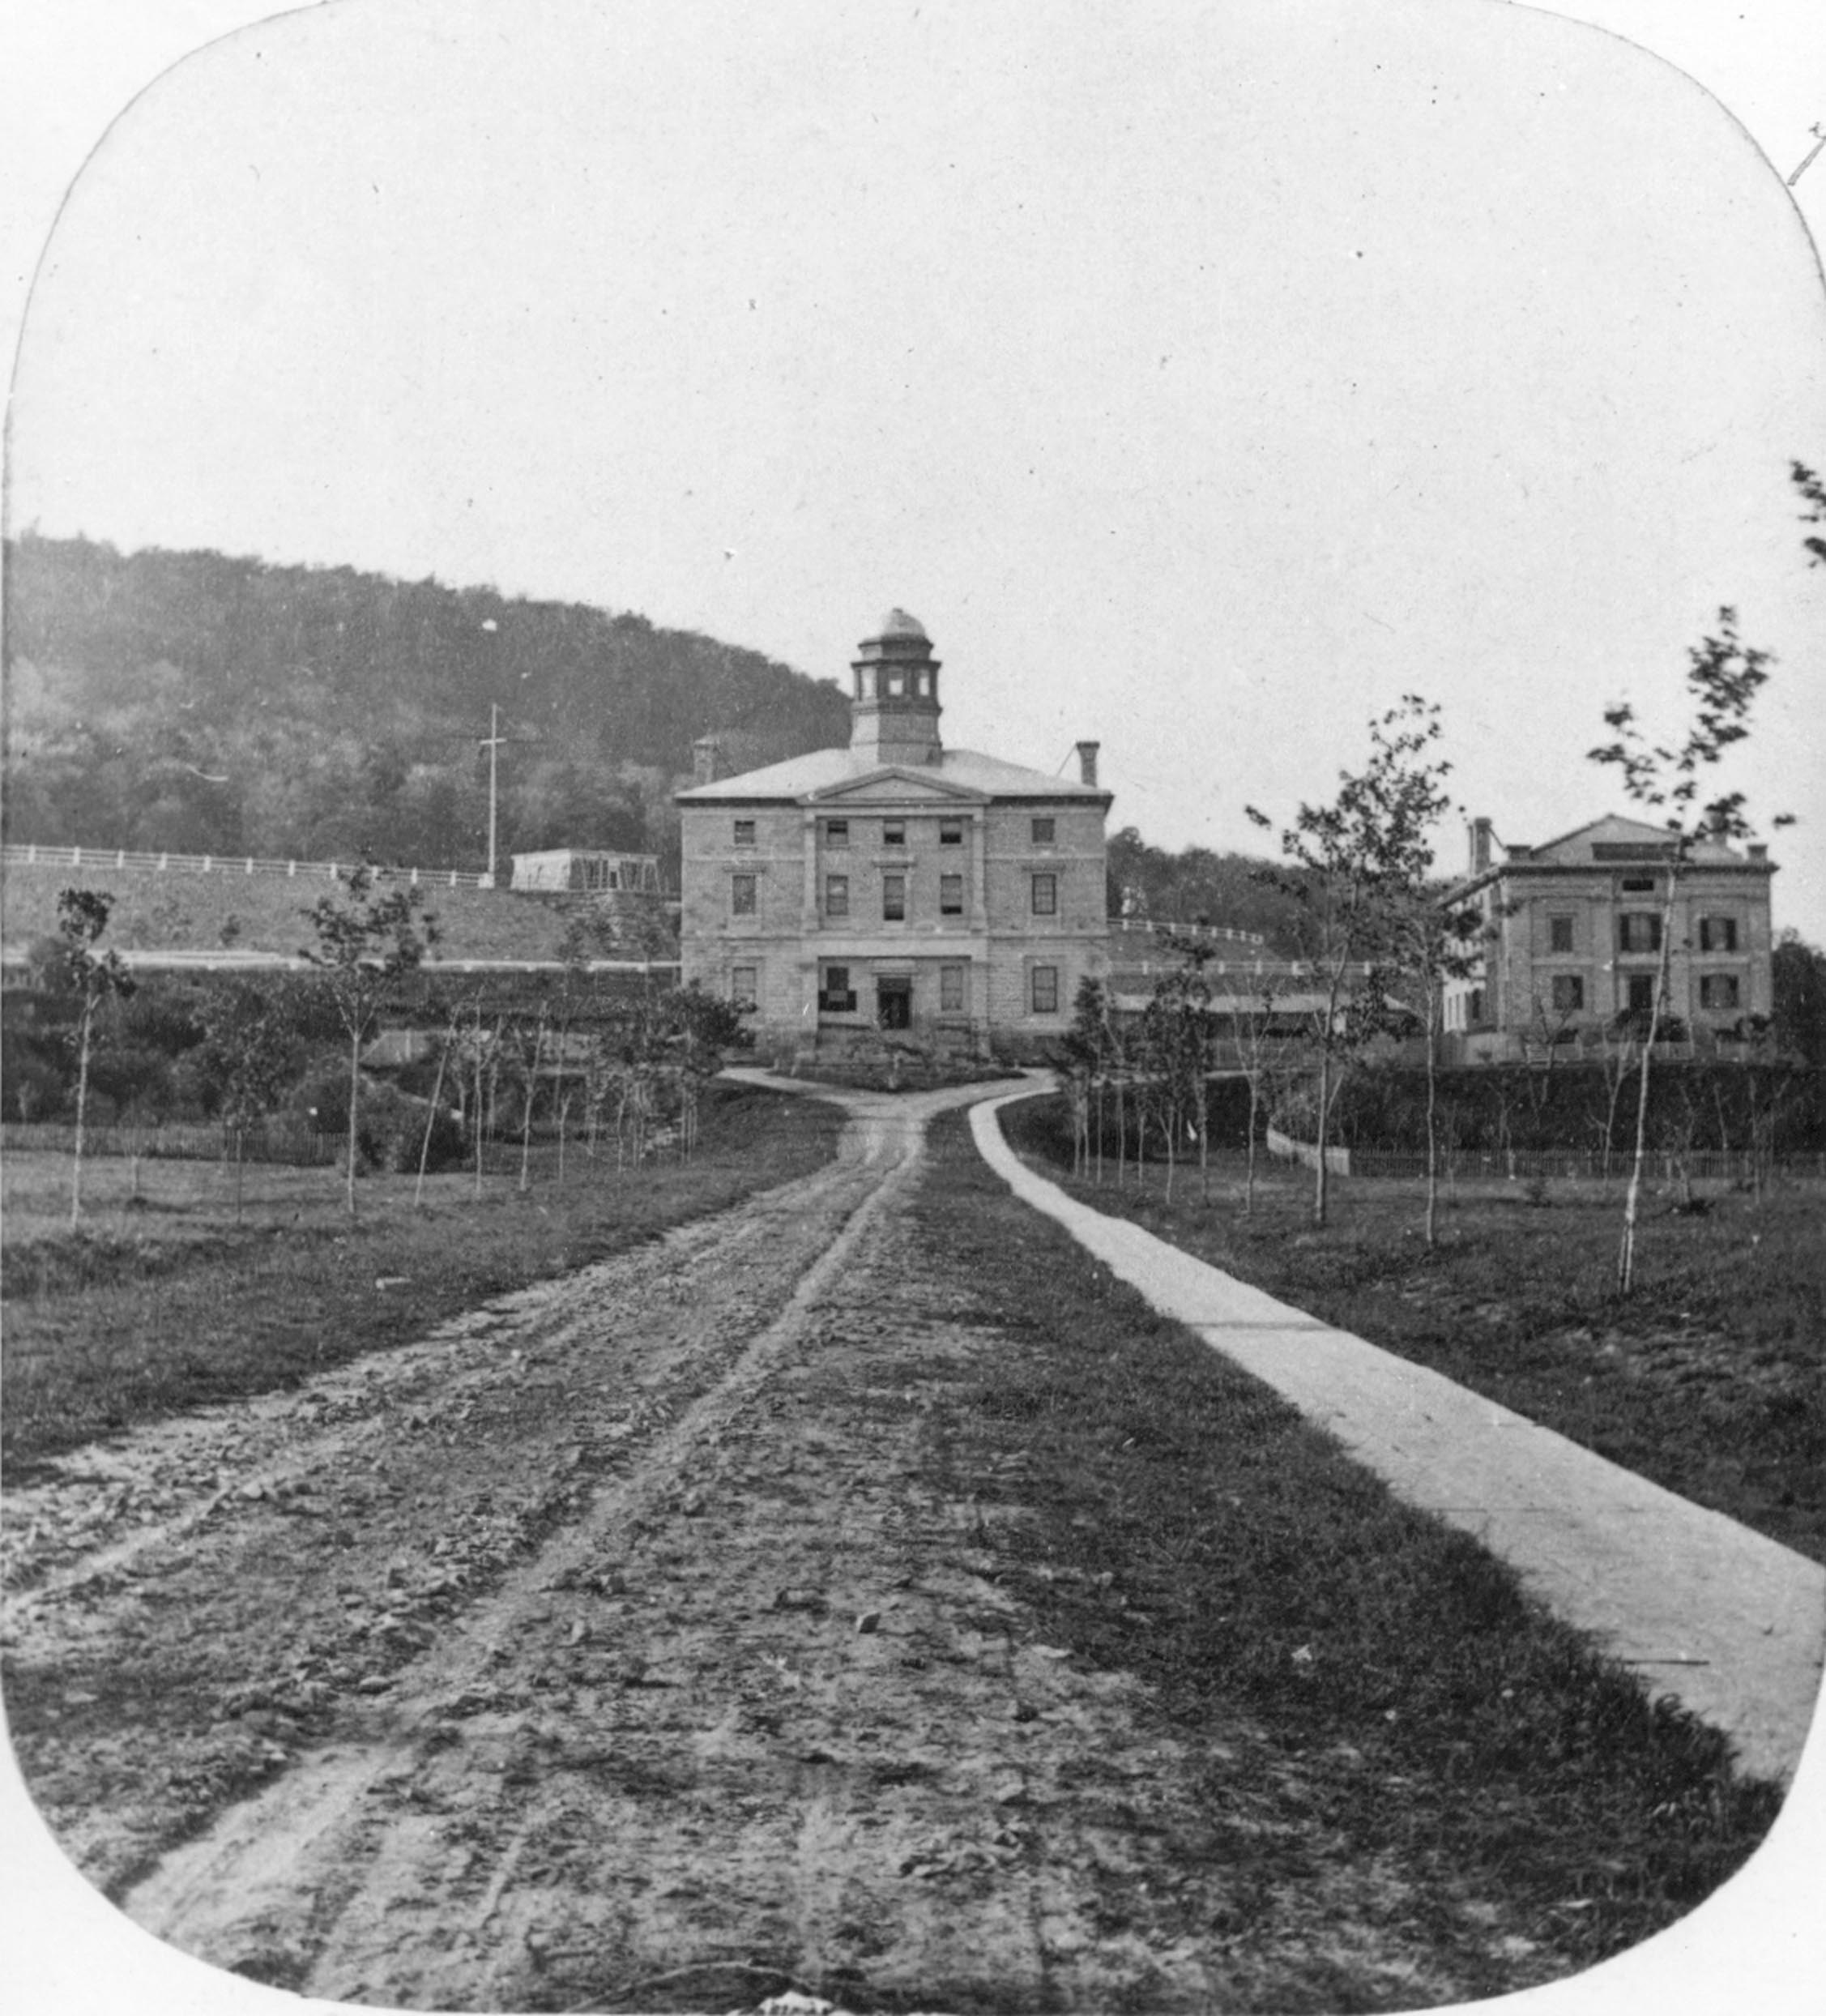 Black and white historical photograph from 1860 featuring the Arts Building at McGill University, photographed by William Notman.